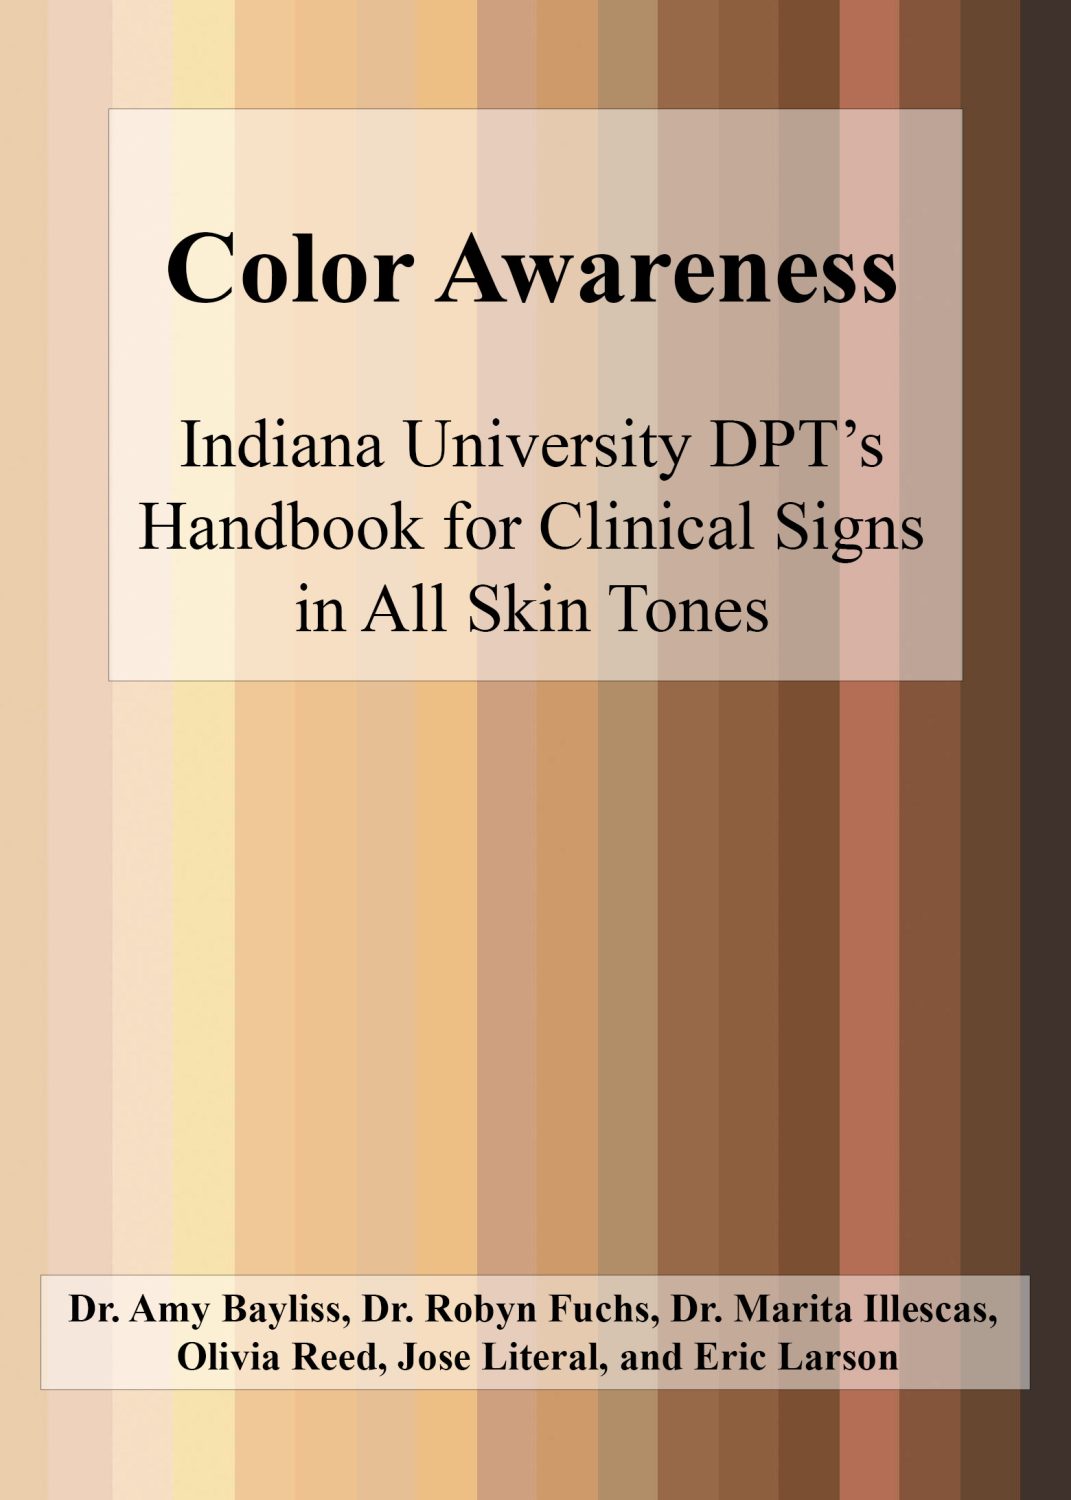 Cover image for Color Awareness: IU DPT's Handbook for Clinical Signs in All Skin Tones